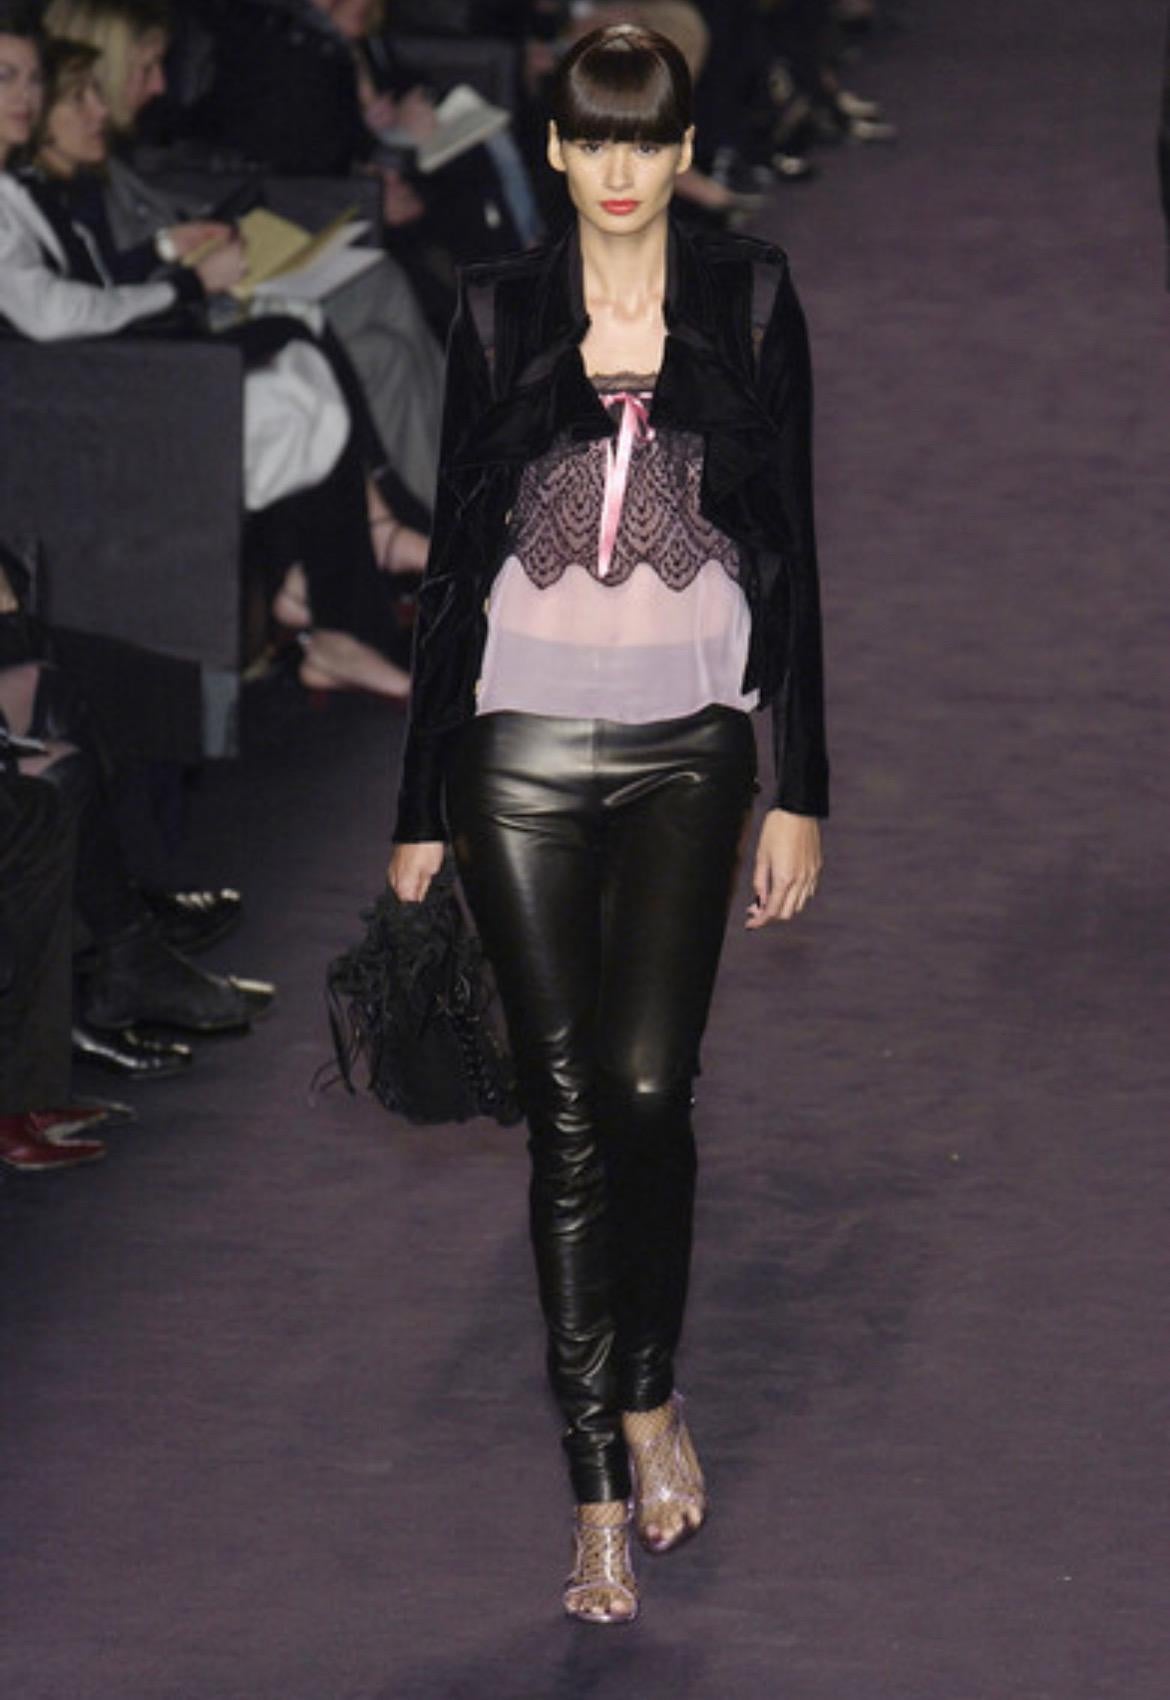 Presenting a fabulous pink and black lace Yves Saint Laurent Rive Gauche tank top, designed by Tom Ford. From the Fall/Winter 2003 collection, this top debuted on the season's runway as part of look 18. Constructed with sheer light pink chiffon this